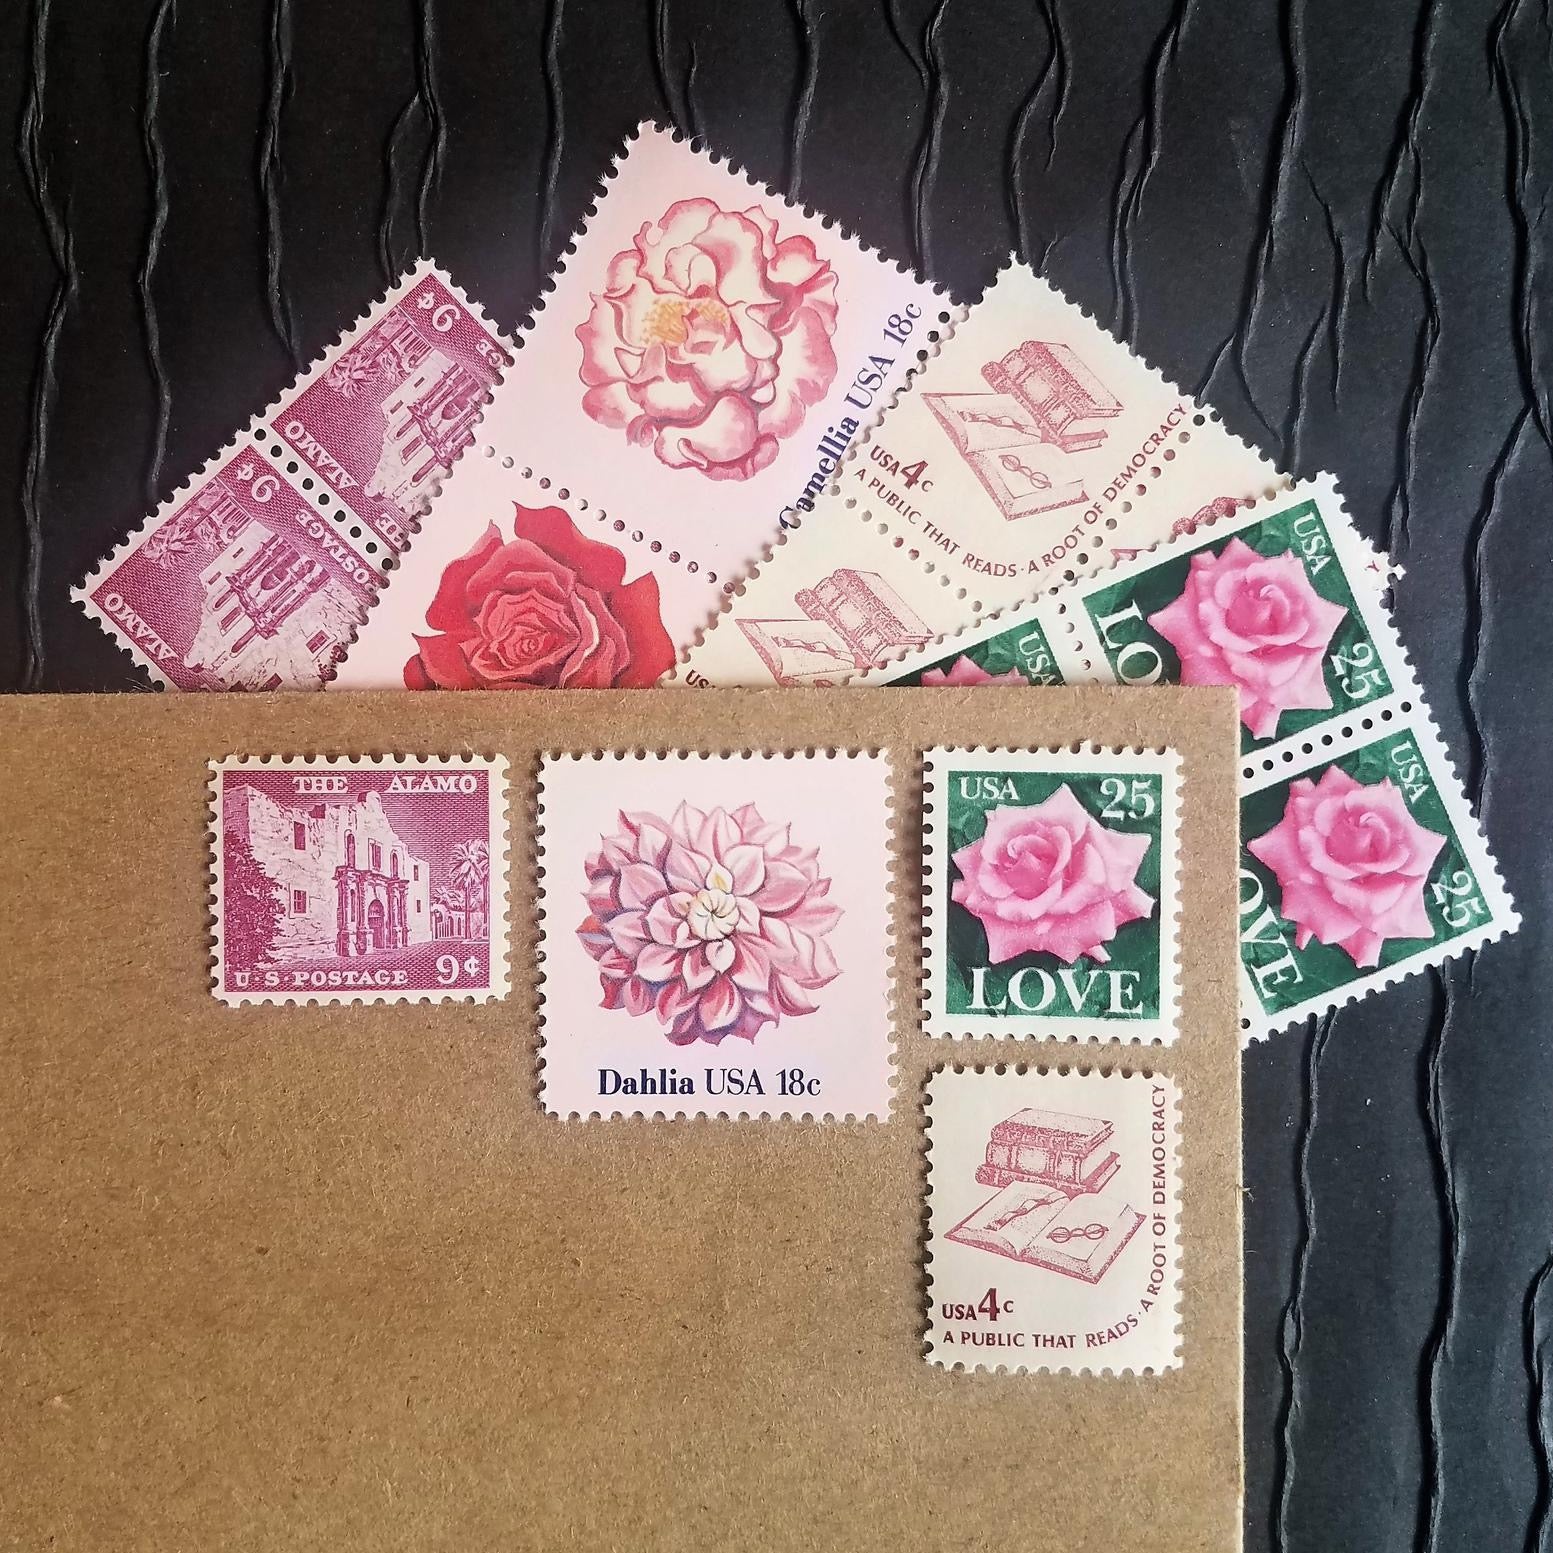 The Best Stationery Supplies and Prettiest Vintage Stamps for Snail Mail, Decor Trends & Design News